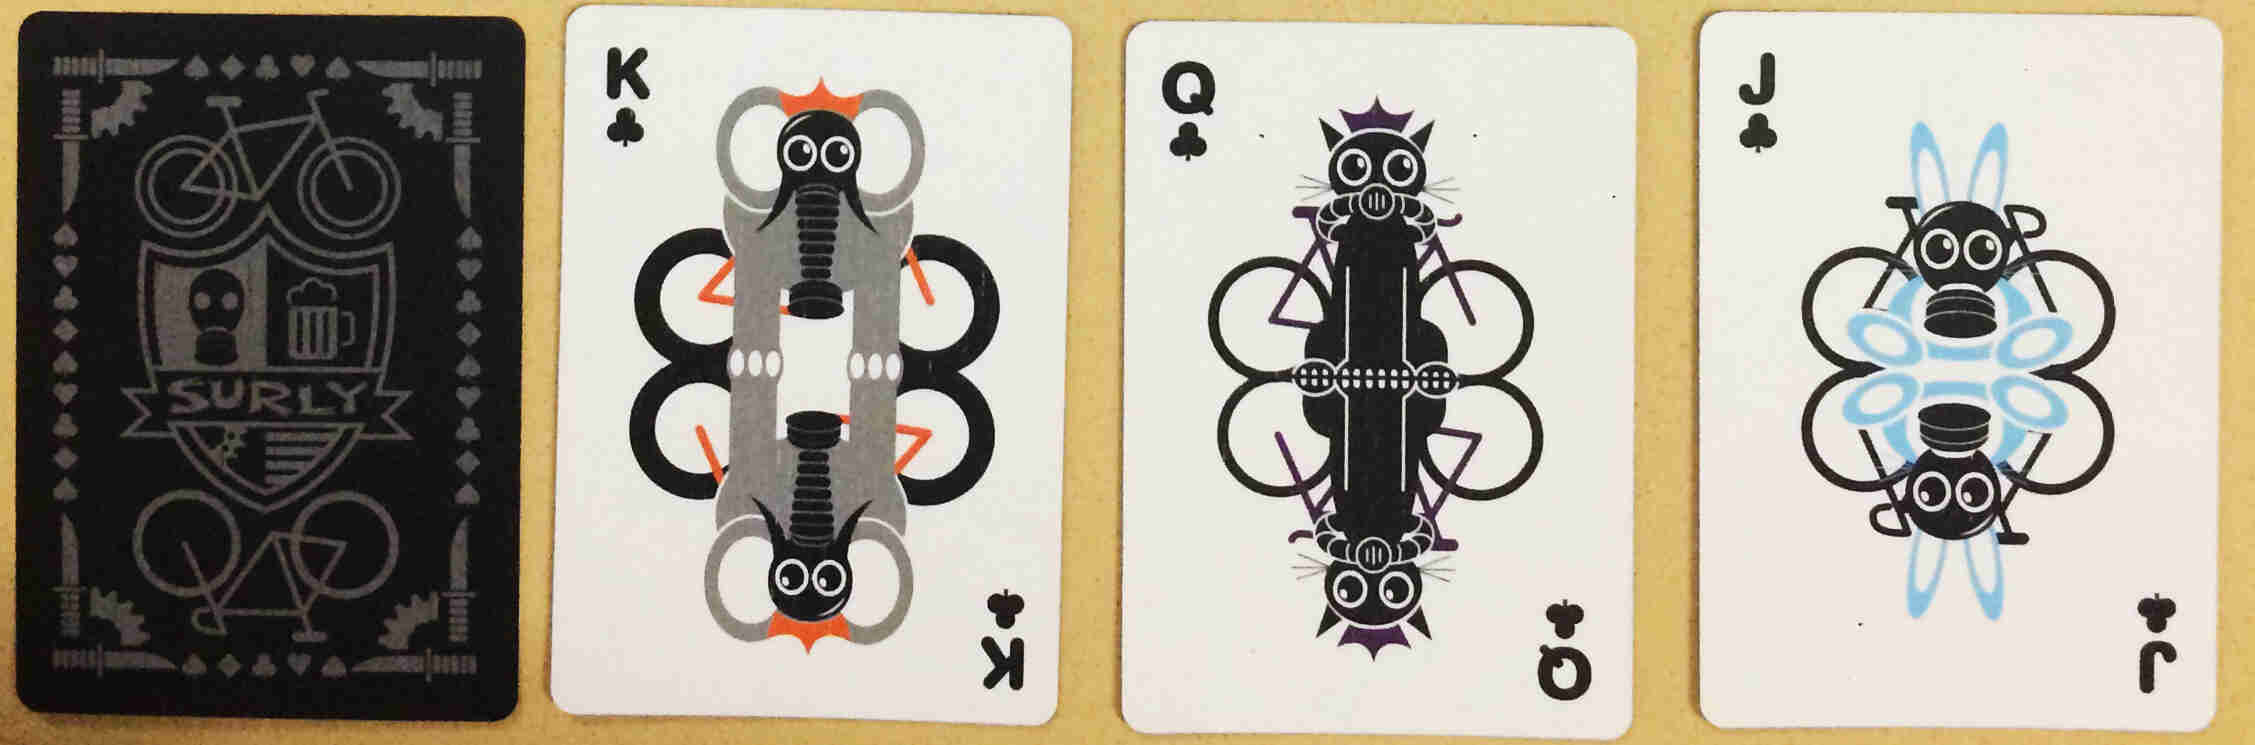 Downward view of two Surly playing cards - One face down and the other face up, showing a King of clubs